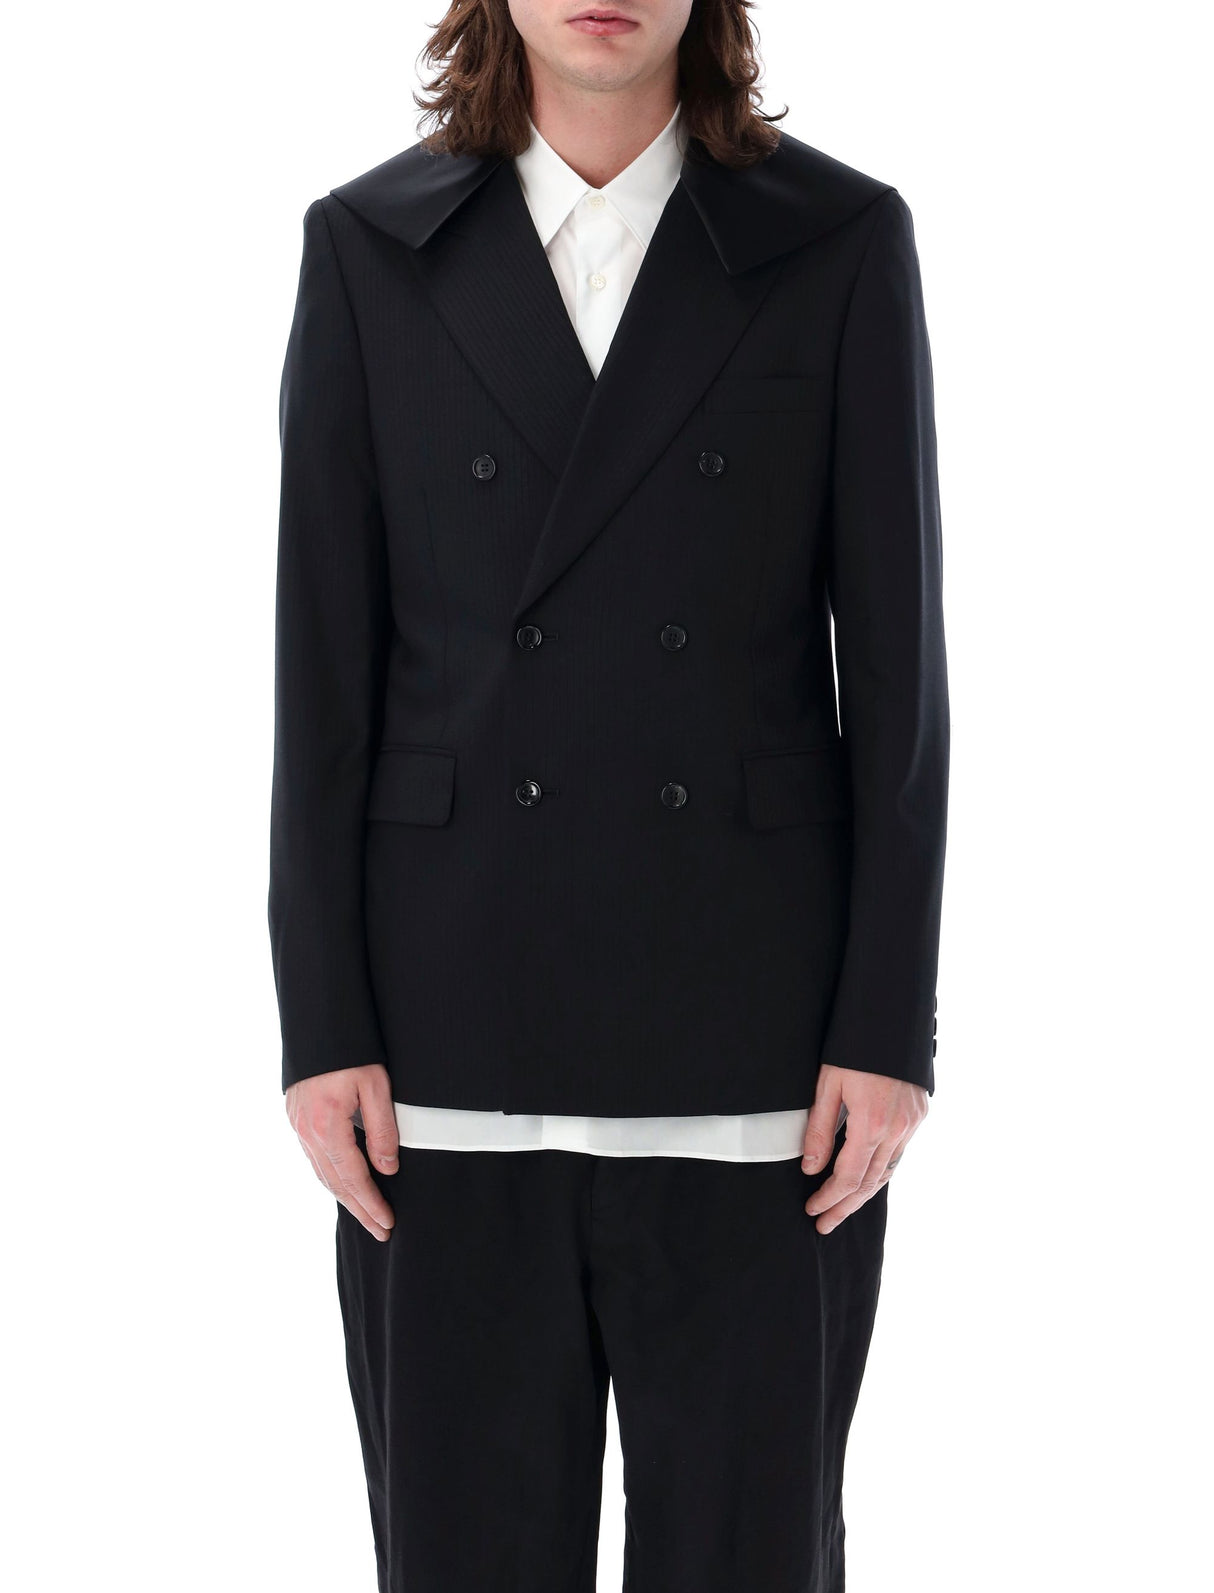 Men's Double-Breasted Wool Blazer with Shiny Satin Collar